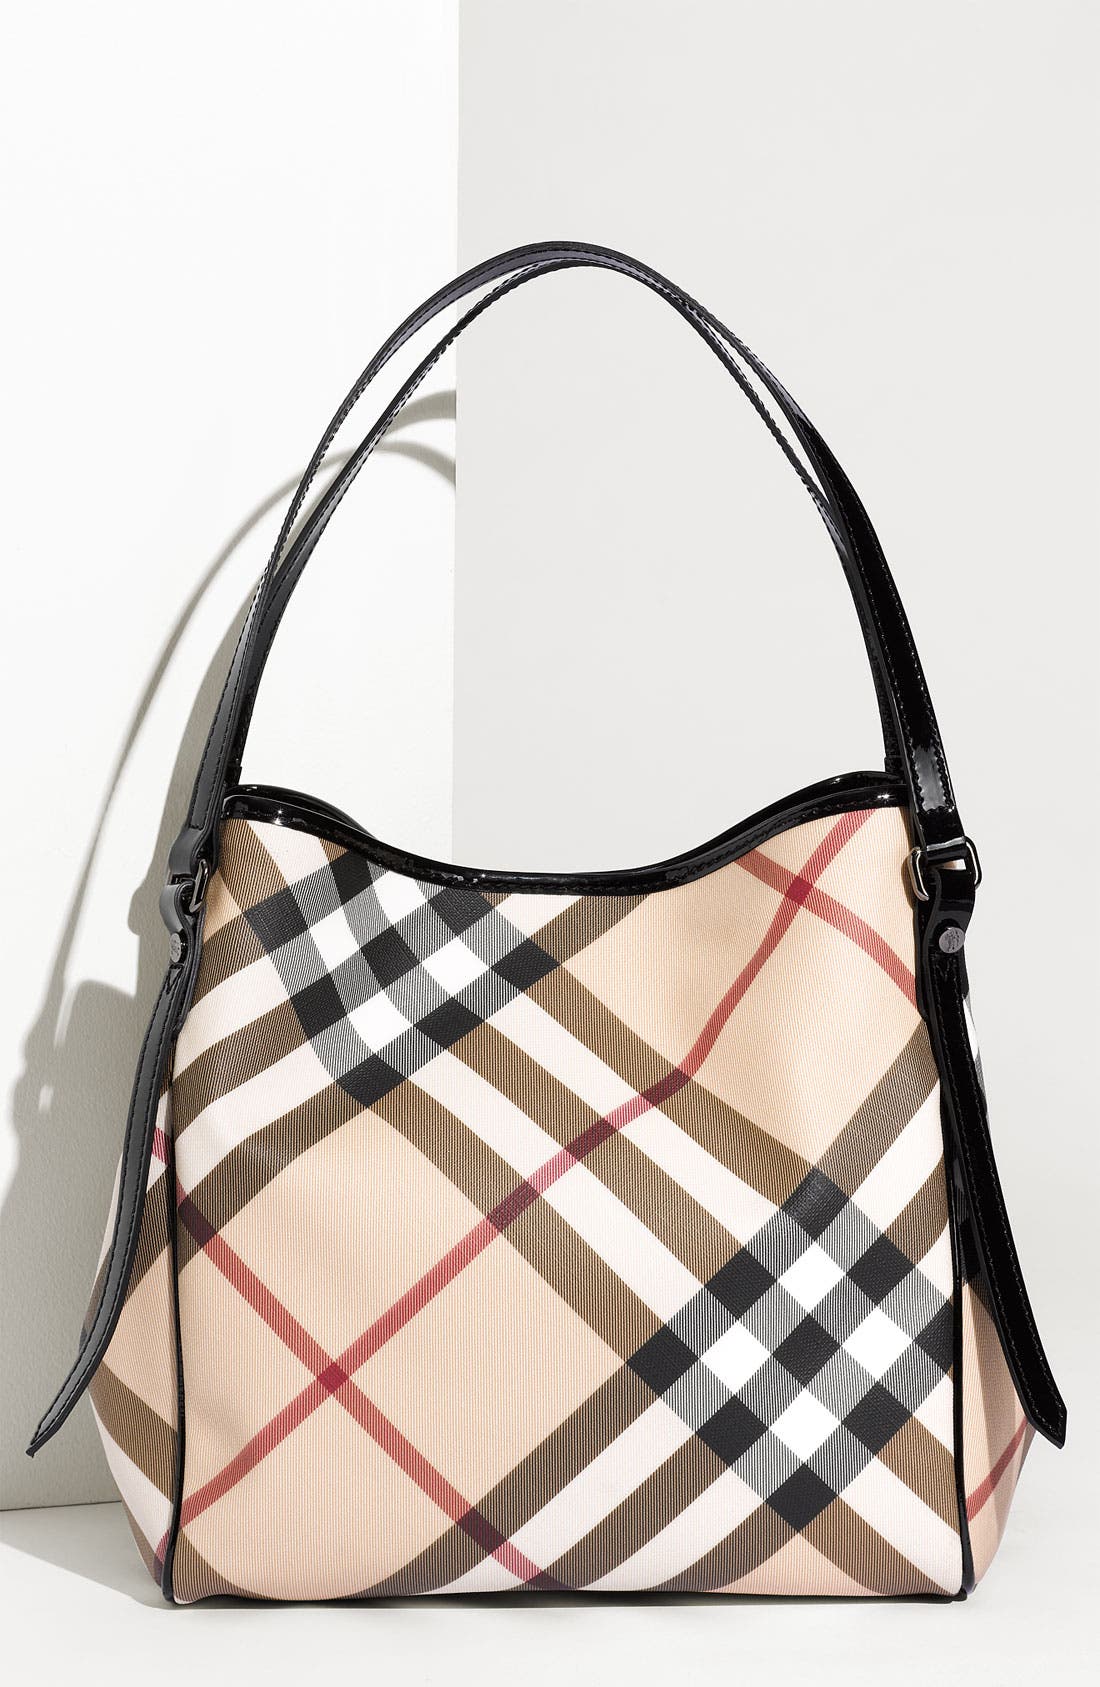 burberry tote nordstrom